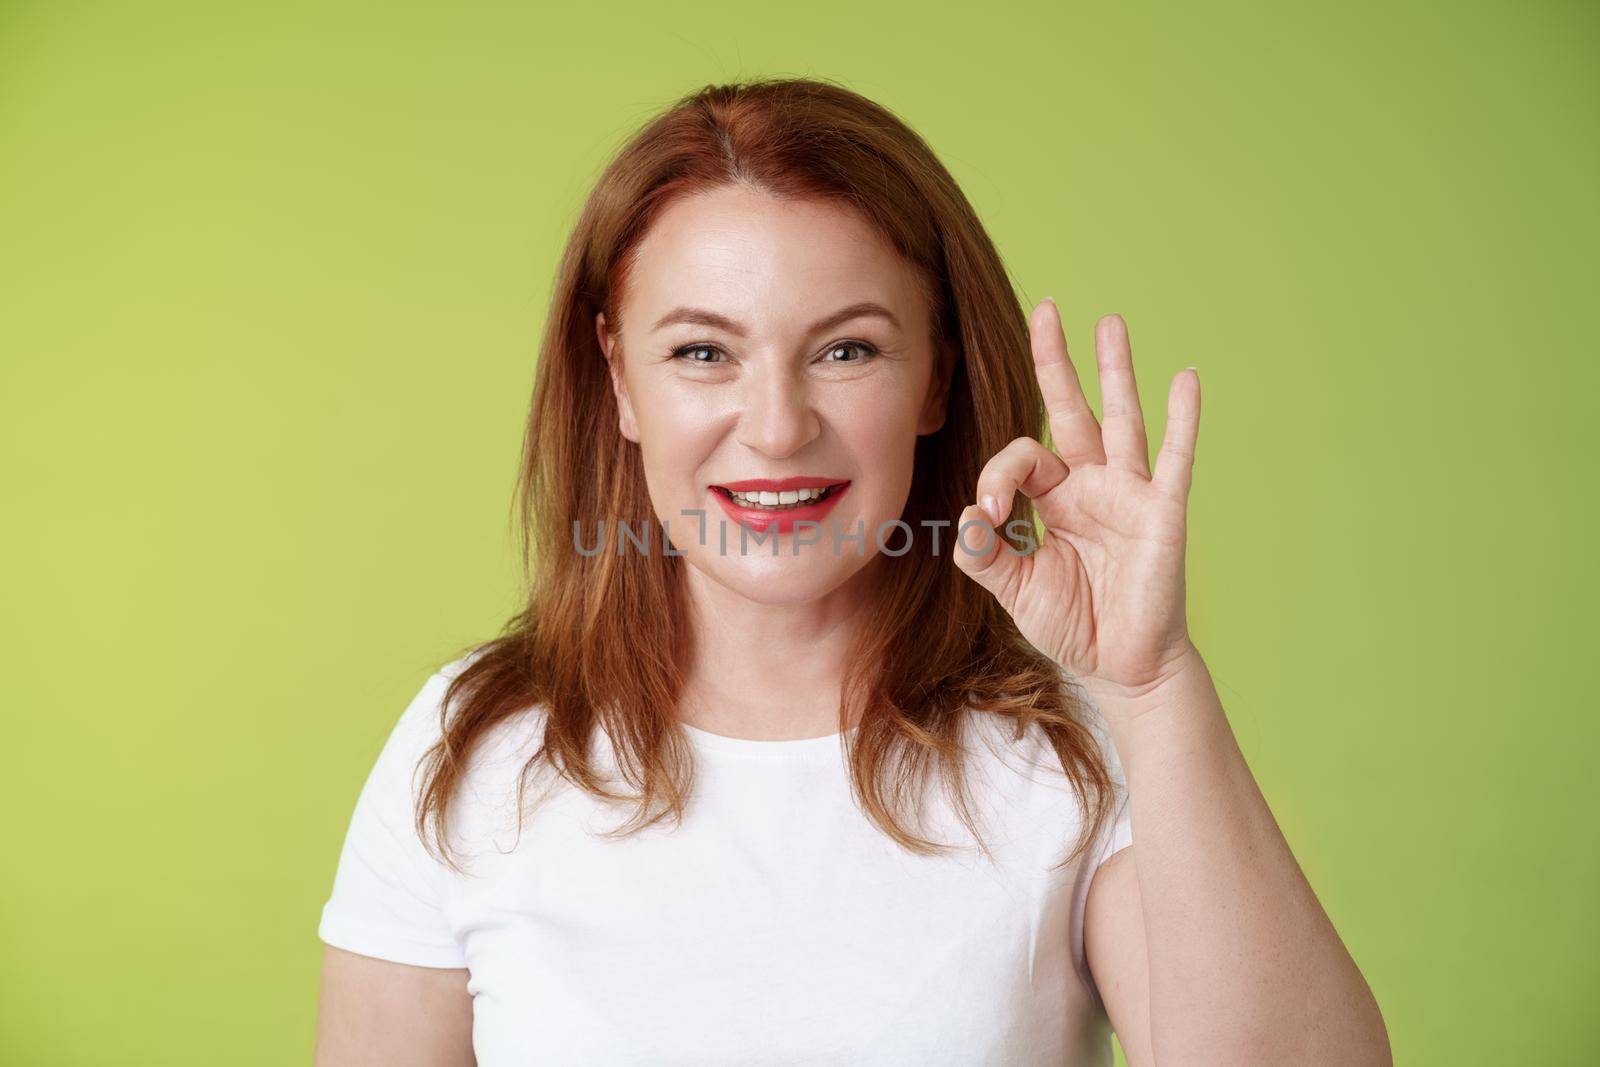 Alright got it. Cheerful motivated determined redhead enthusiastic middle-aged woman show okay ok confirm gesture assured smiling satisfactory gesture give positive like approval green background by Benzoix